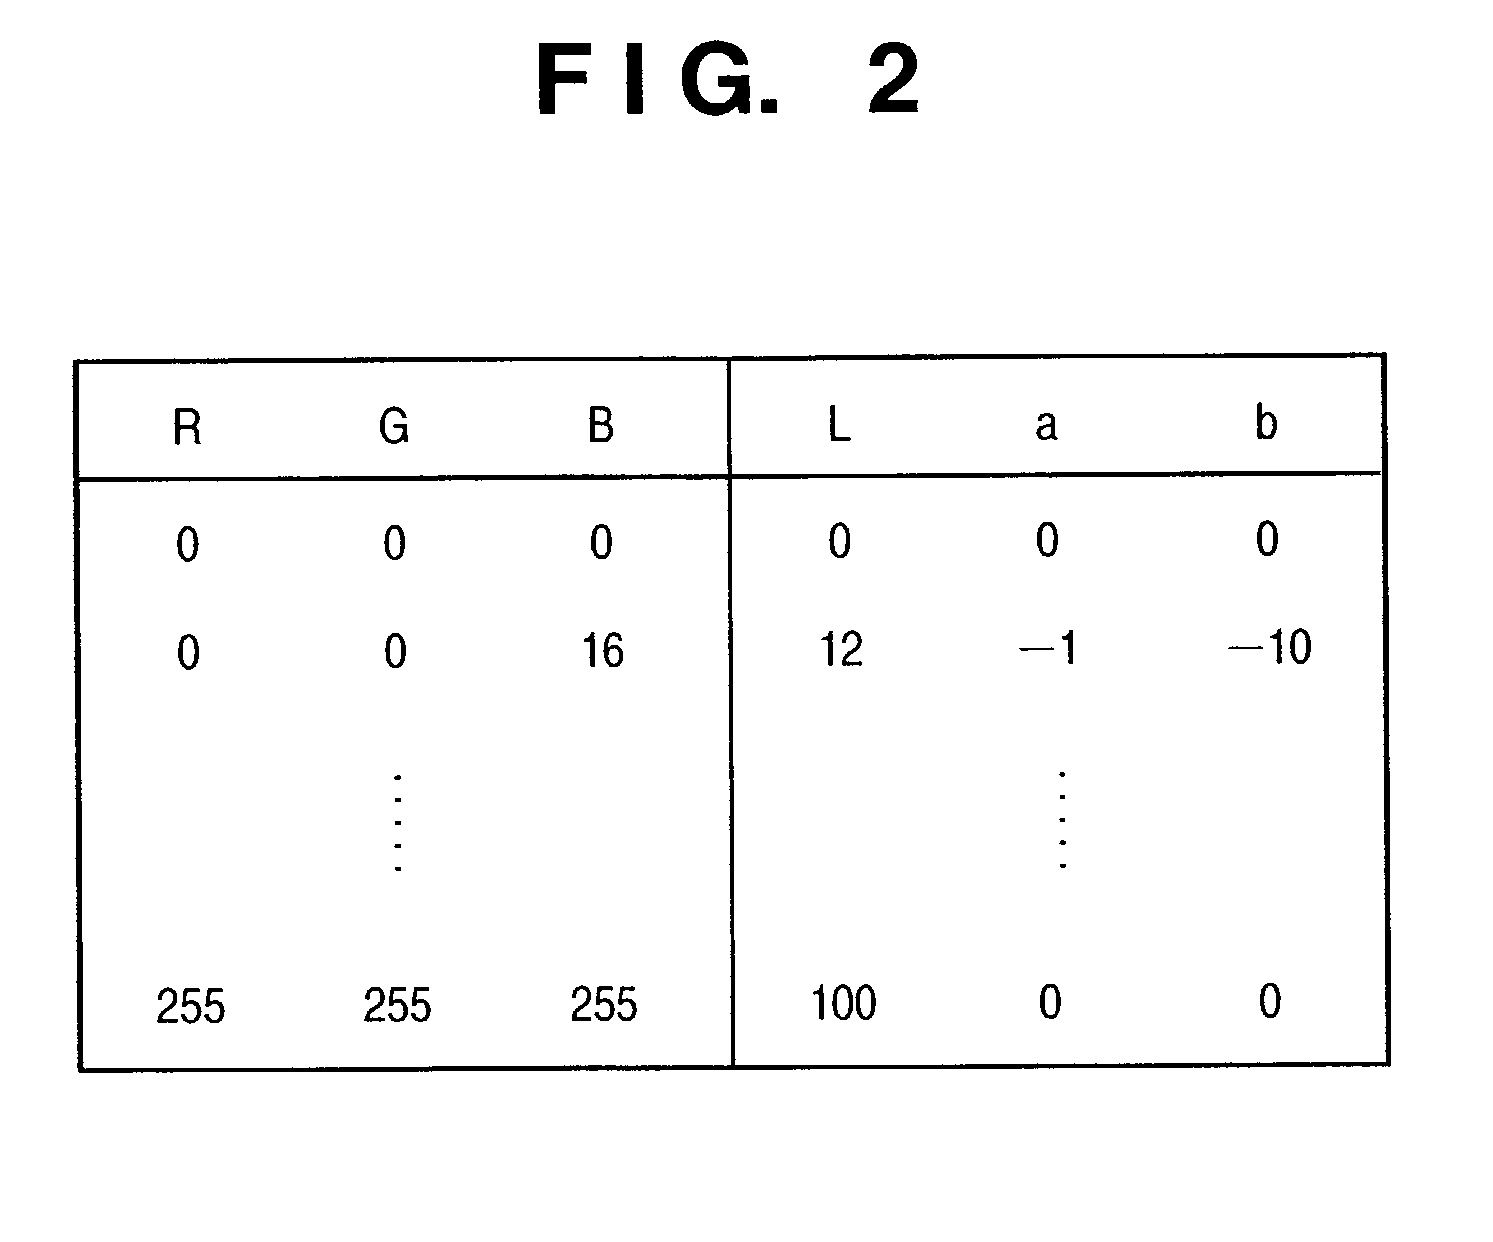 Image processing method and apparatus for color conversion accommodating device non-linearity